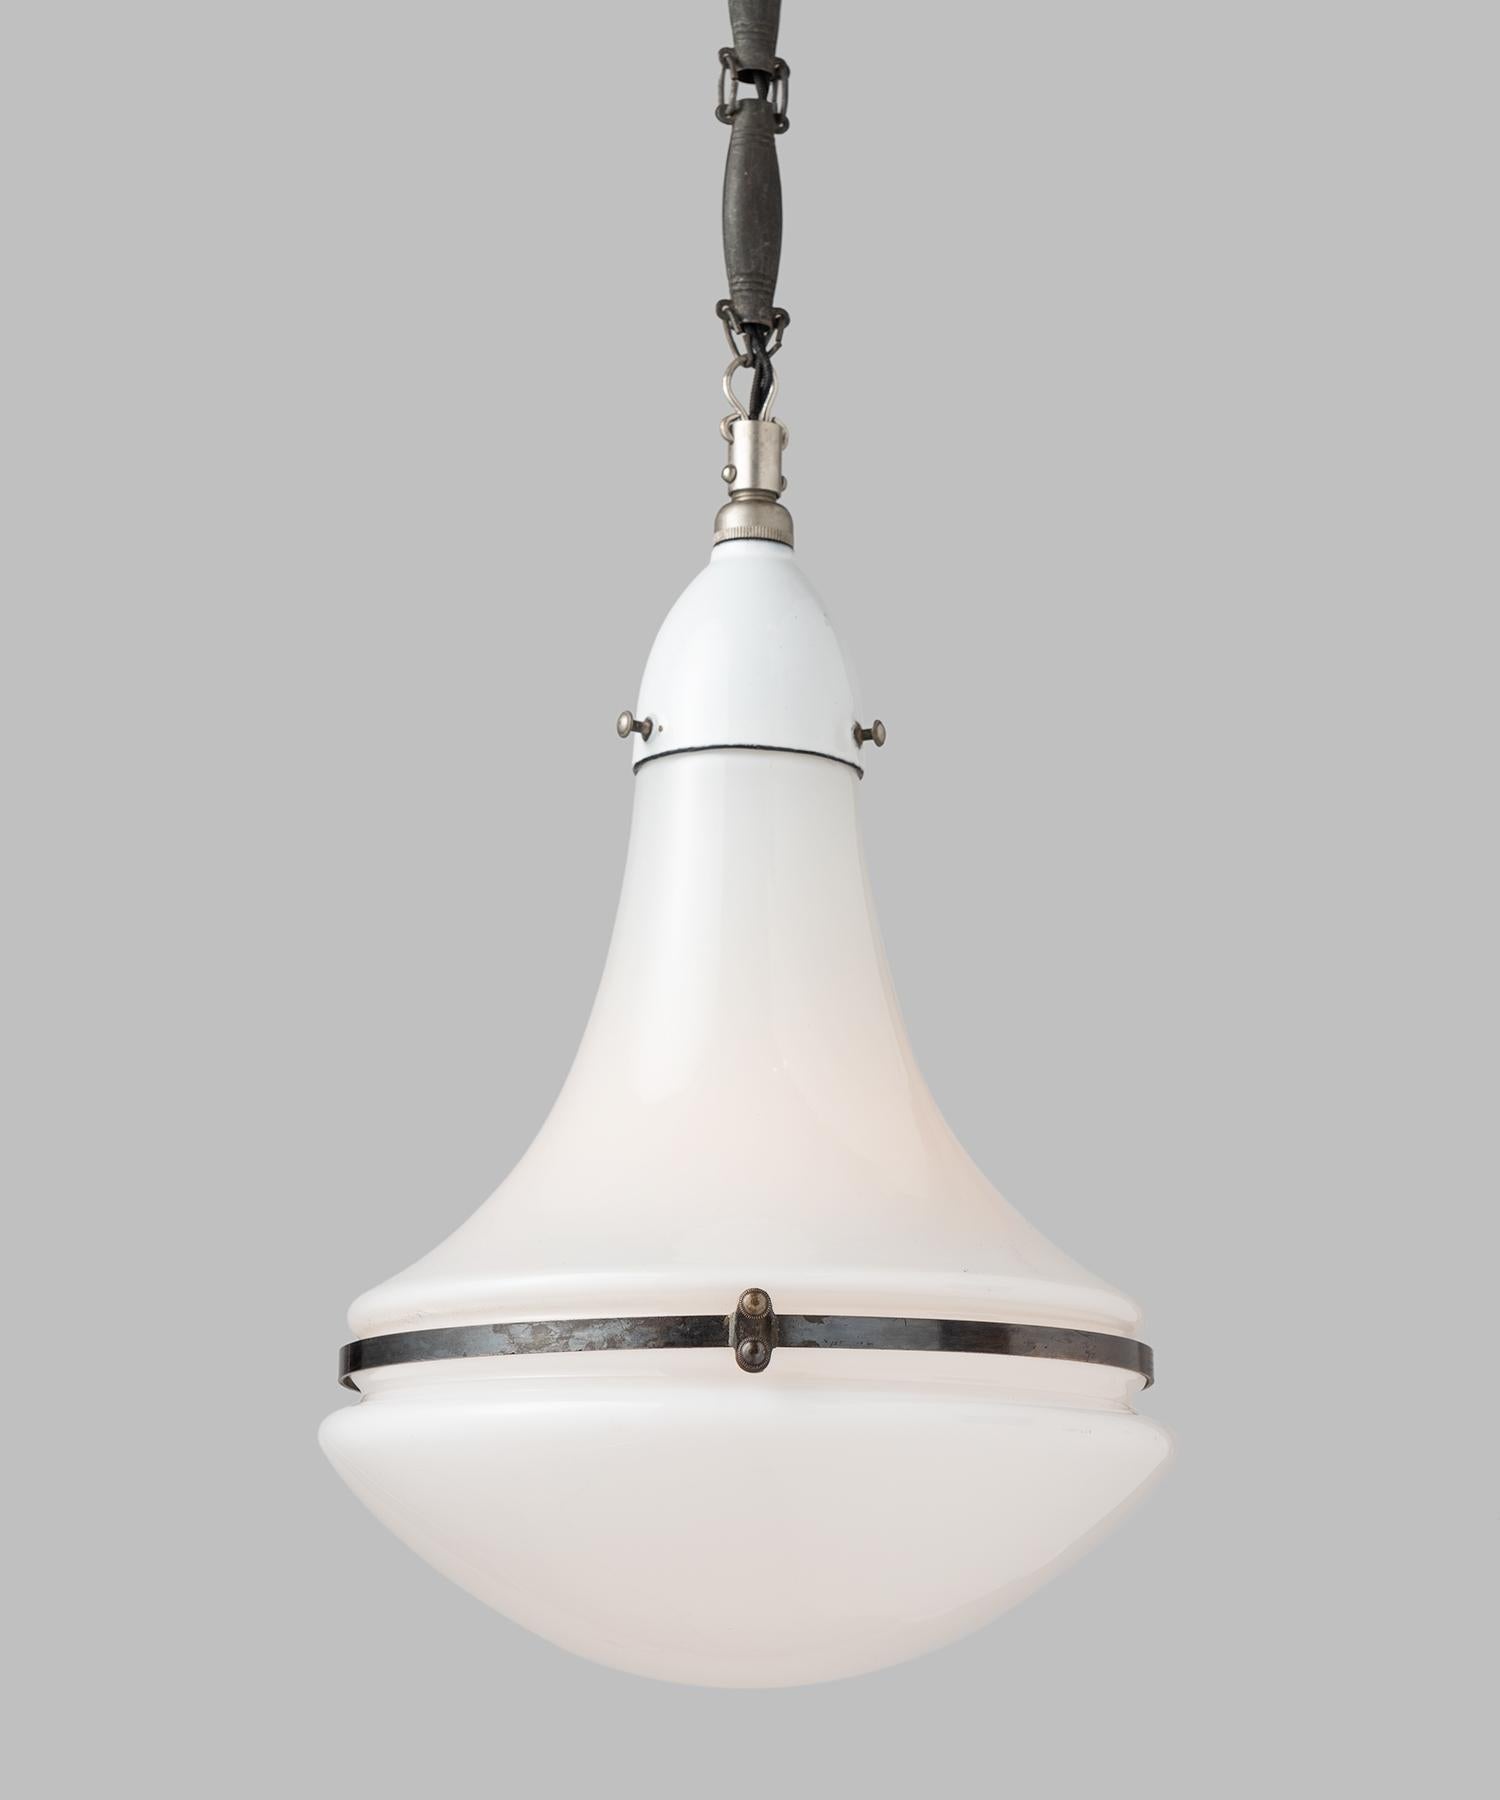 Luzette pendant by Peter Behrens, Germany, circa 1920.

Small pendant with opaline glass top and bottom, secured with enameled fitter and copper brace. Comes with original chain and canopy. Manufactured by AEG Siemens with manufacturer's mark.